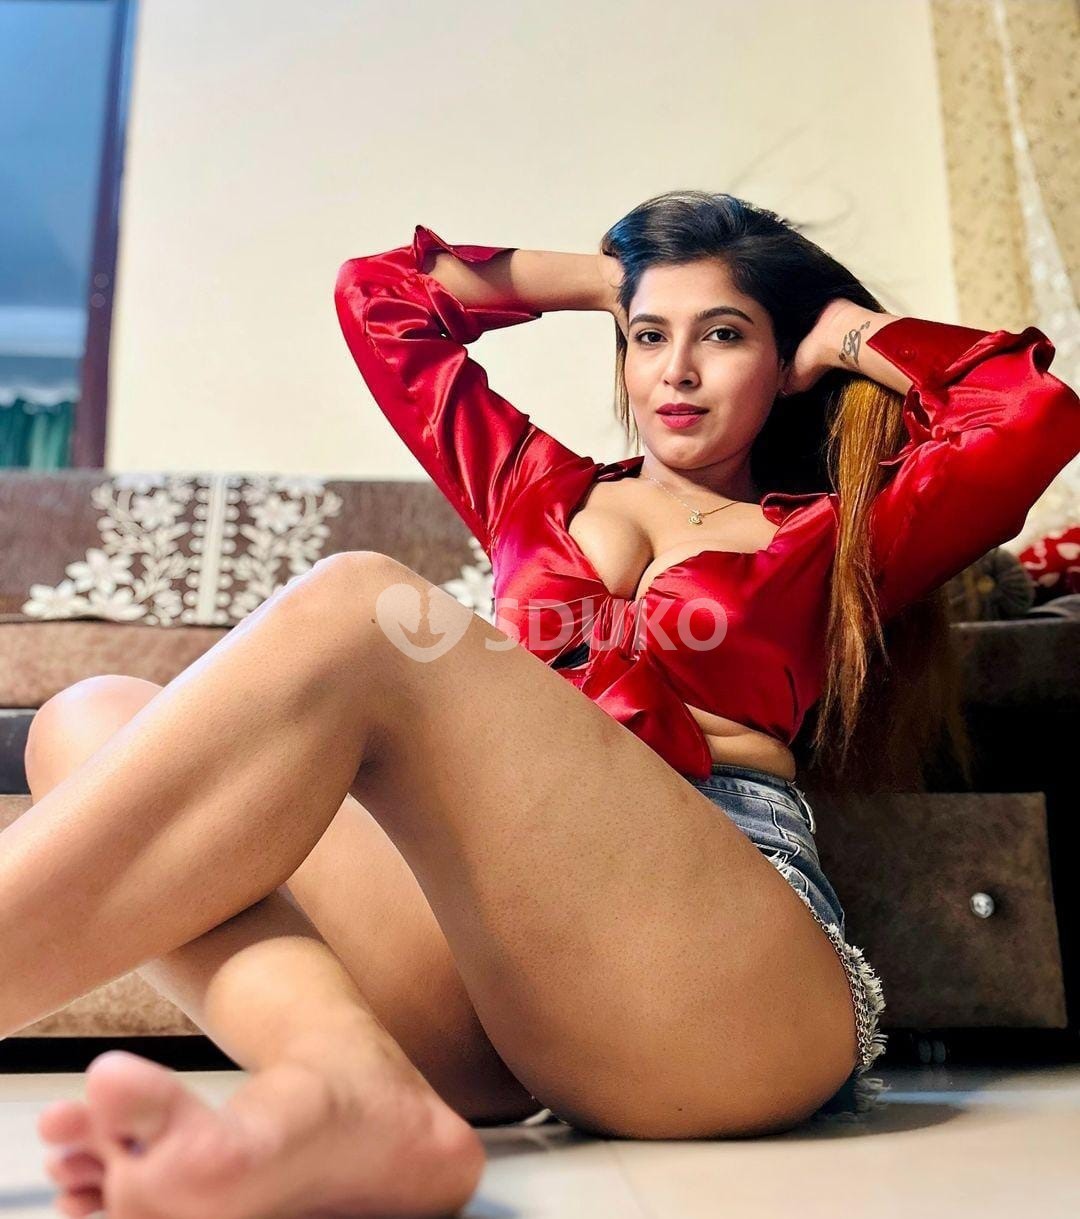 Dwarka ❣️⭐🌟💯vip genuine high profile girls available in 24 hours call me now ⭐⭐⭐